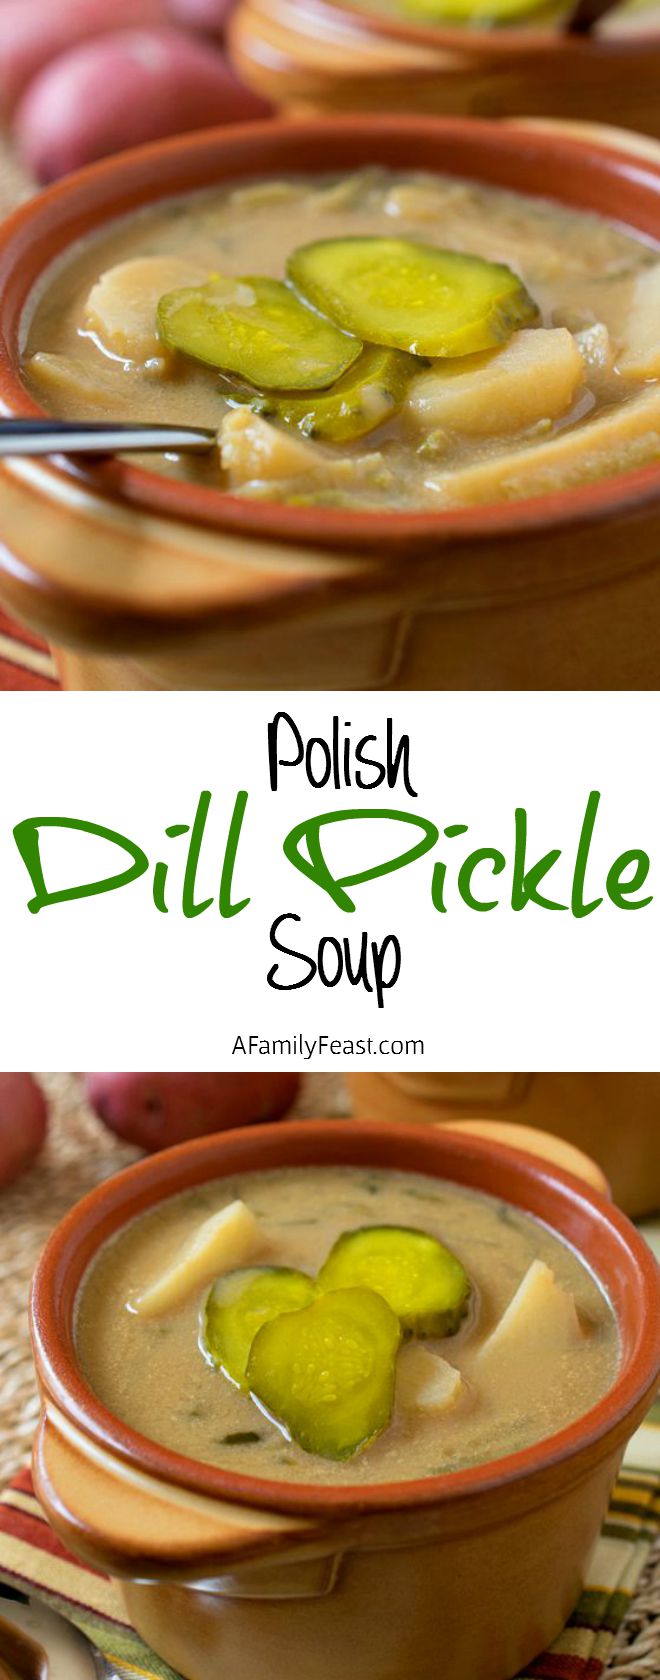 Polish Dill Pickle Soup - A traditional Polish soup that is addictively delicious! Simple ingredients and simple to prepare.